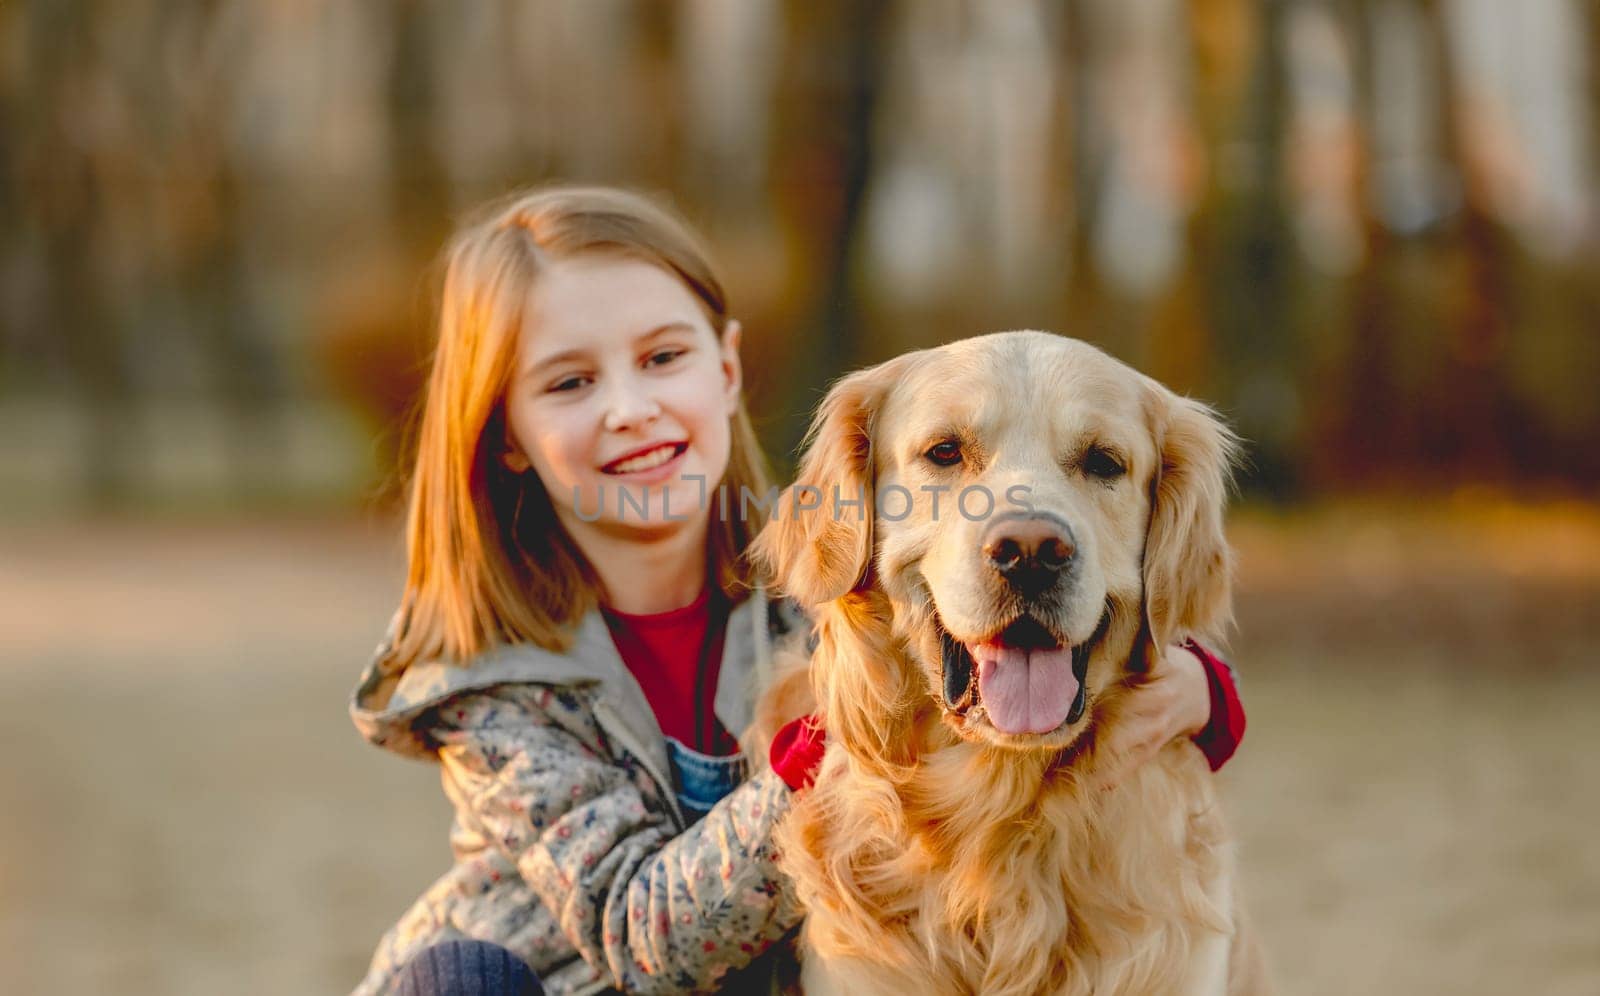 Preteen girl with golden retriever dog sitting in park in beautiful spring autumn day.